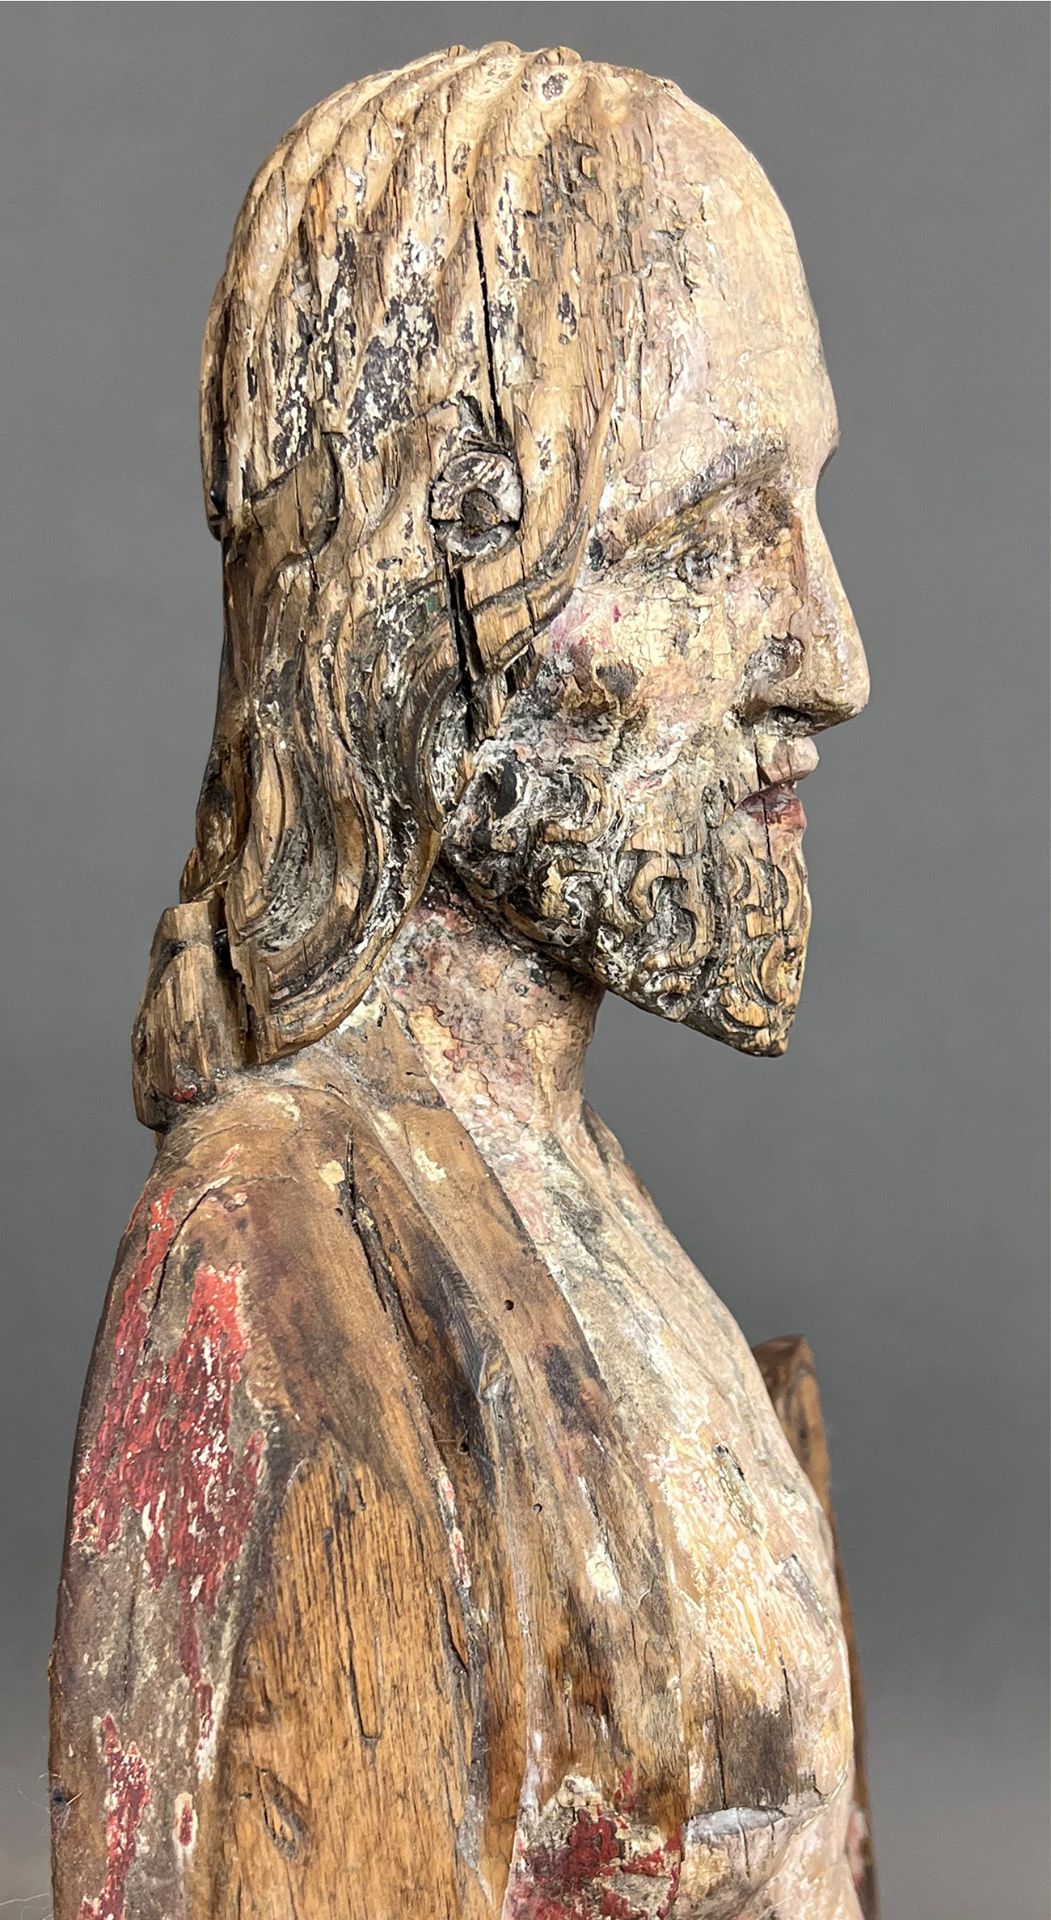 Wooden figure. Christ. Gothic style. Mid 15th century. Lower Rhine. - Image 9 of 15